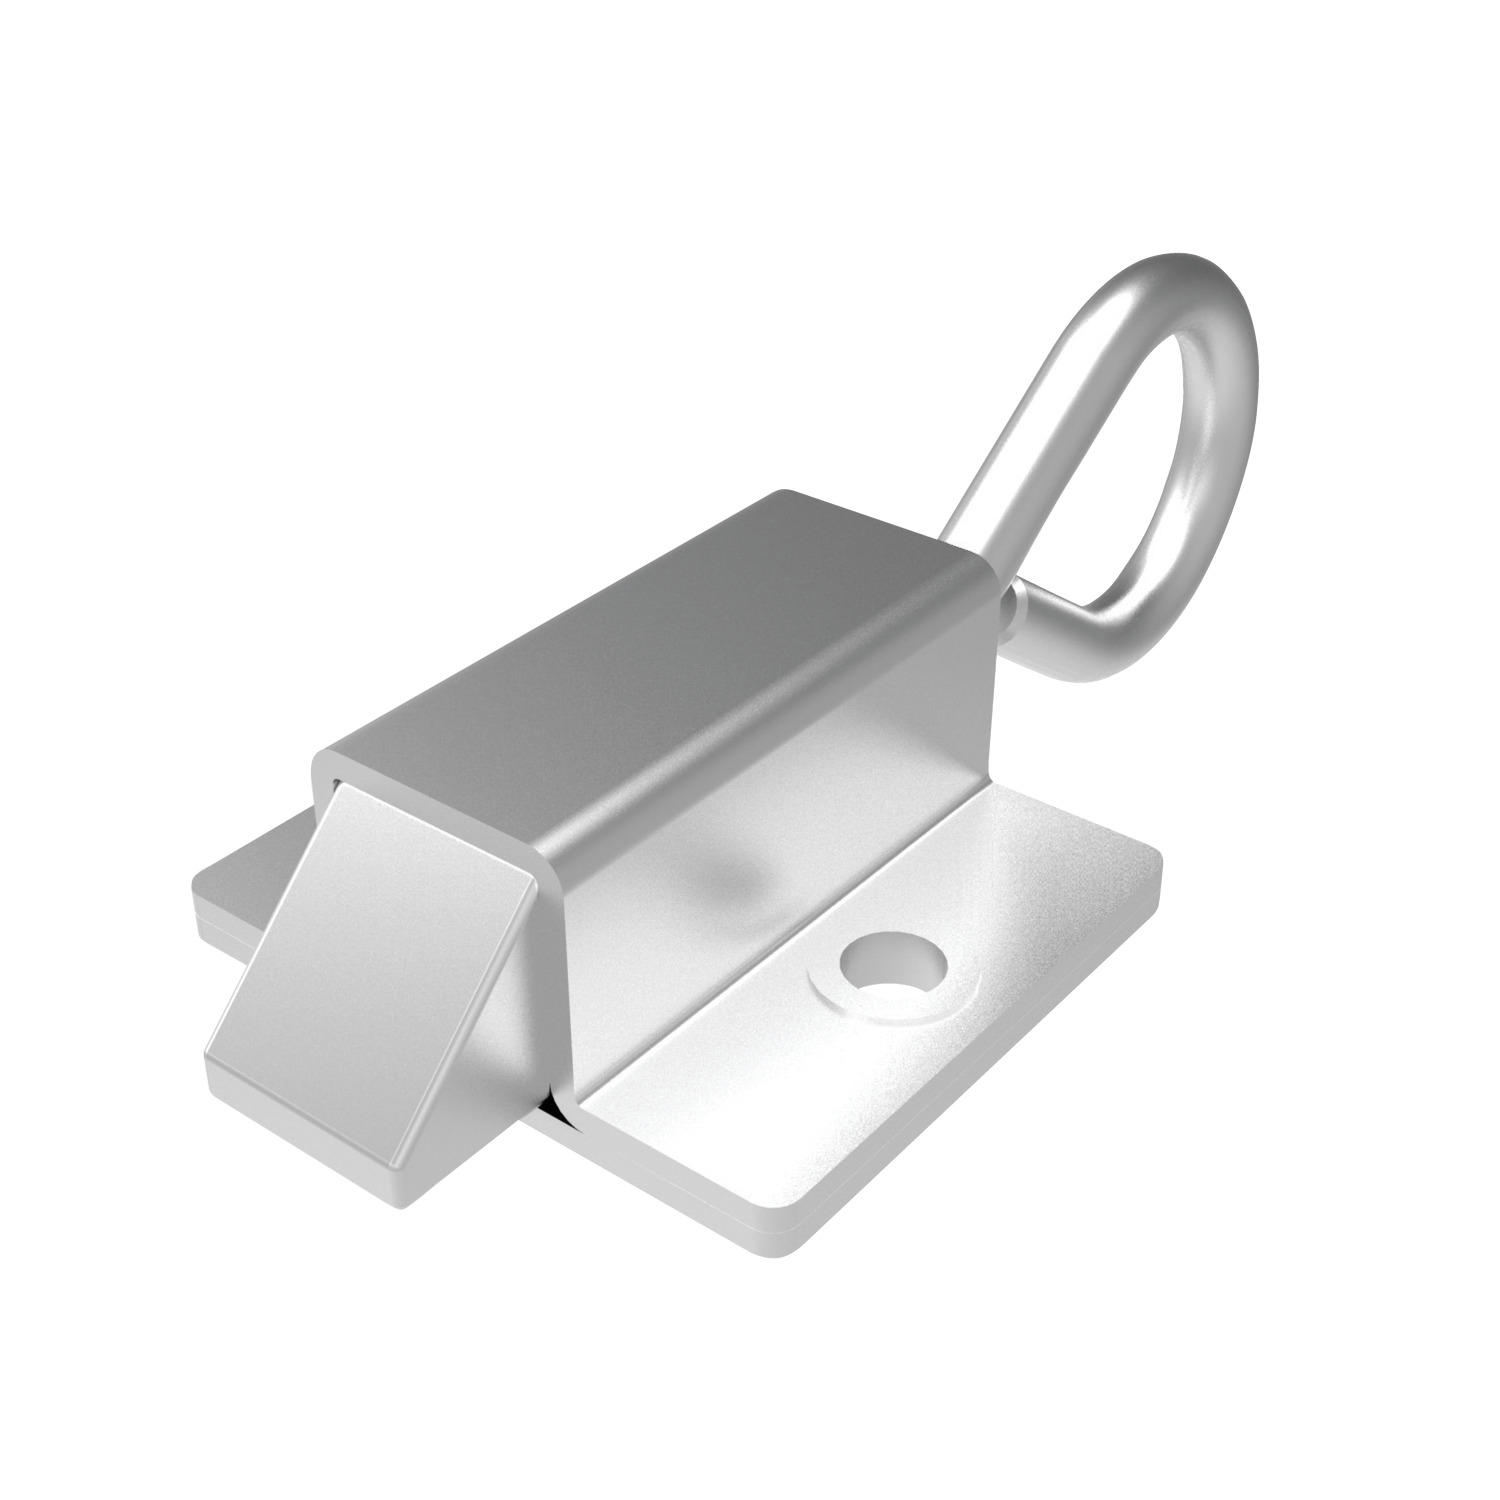 Product J6266, Slide Bar Latches - Pull Ring steel / 